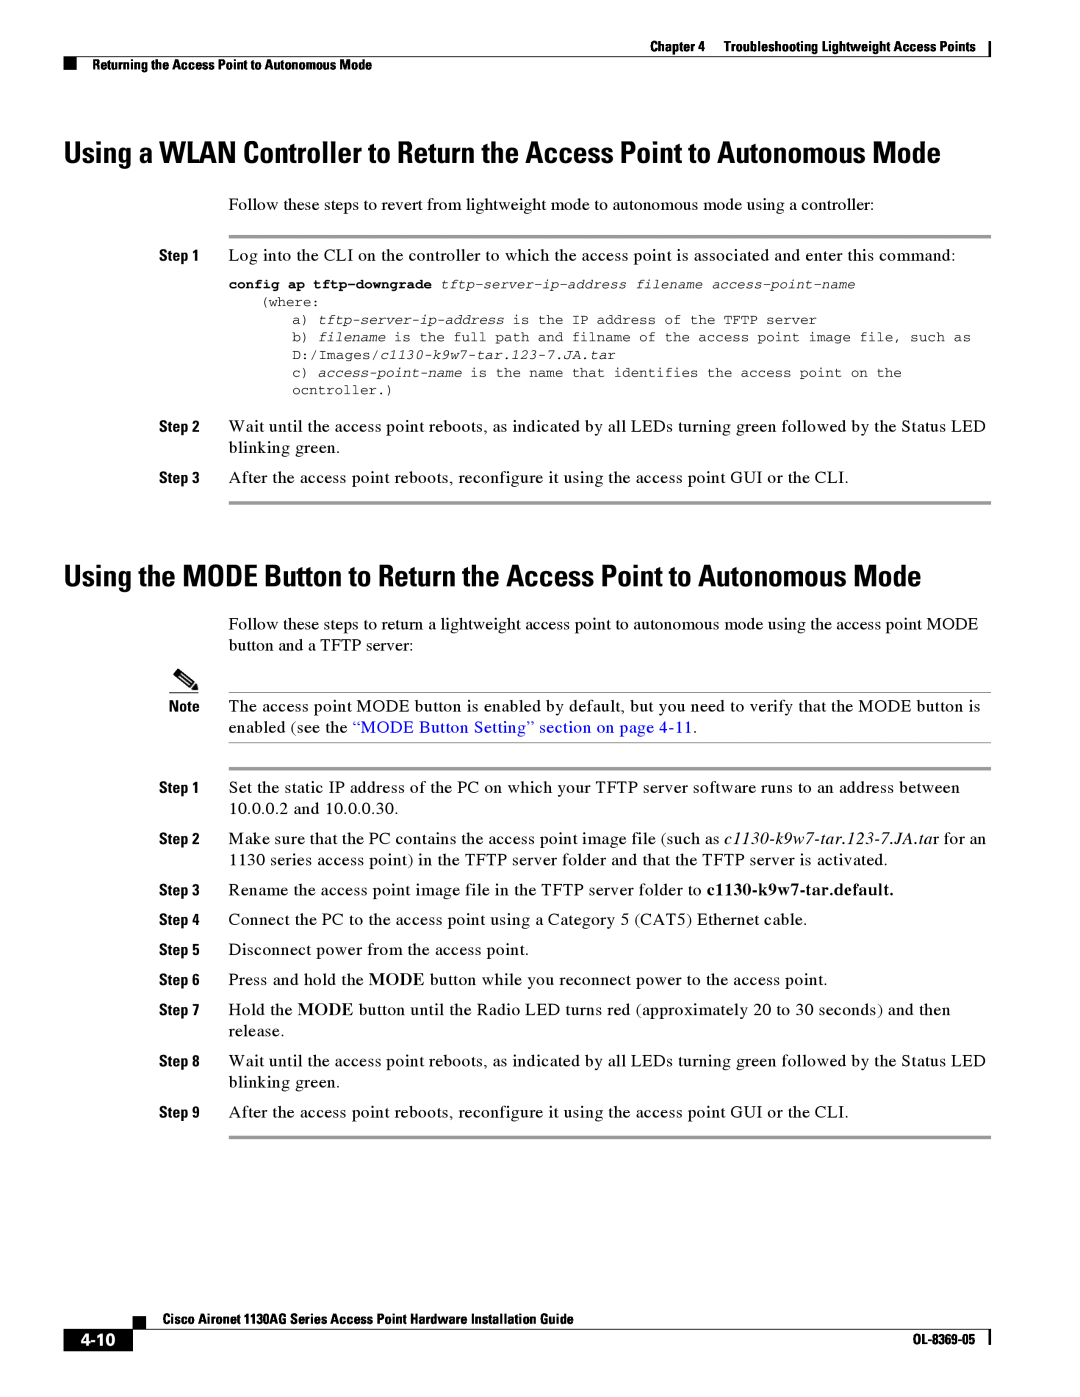 Cisco Systems 1130AG manual Using a WLAN Controller to Return the Access Point to Autonomous Mode, 4-10 